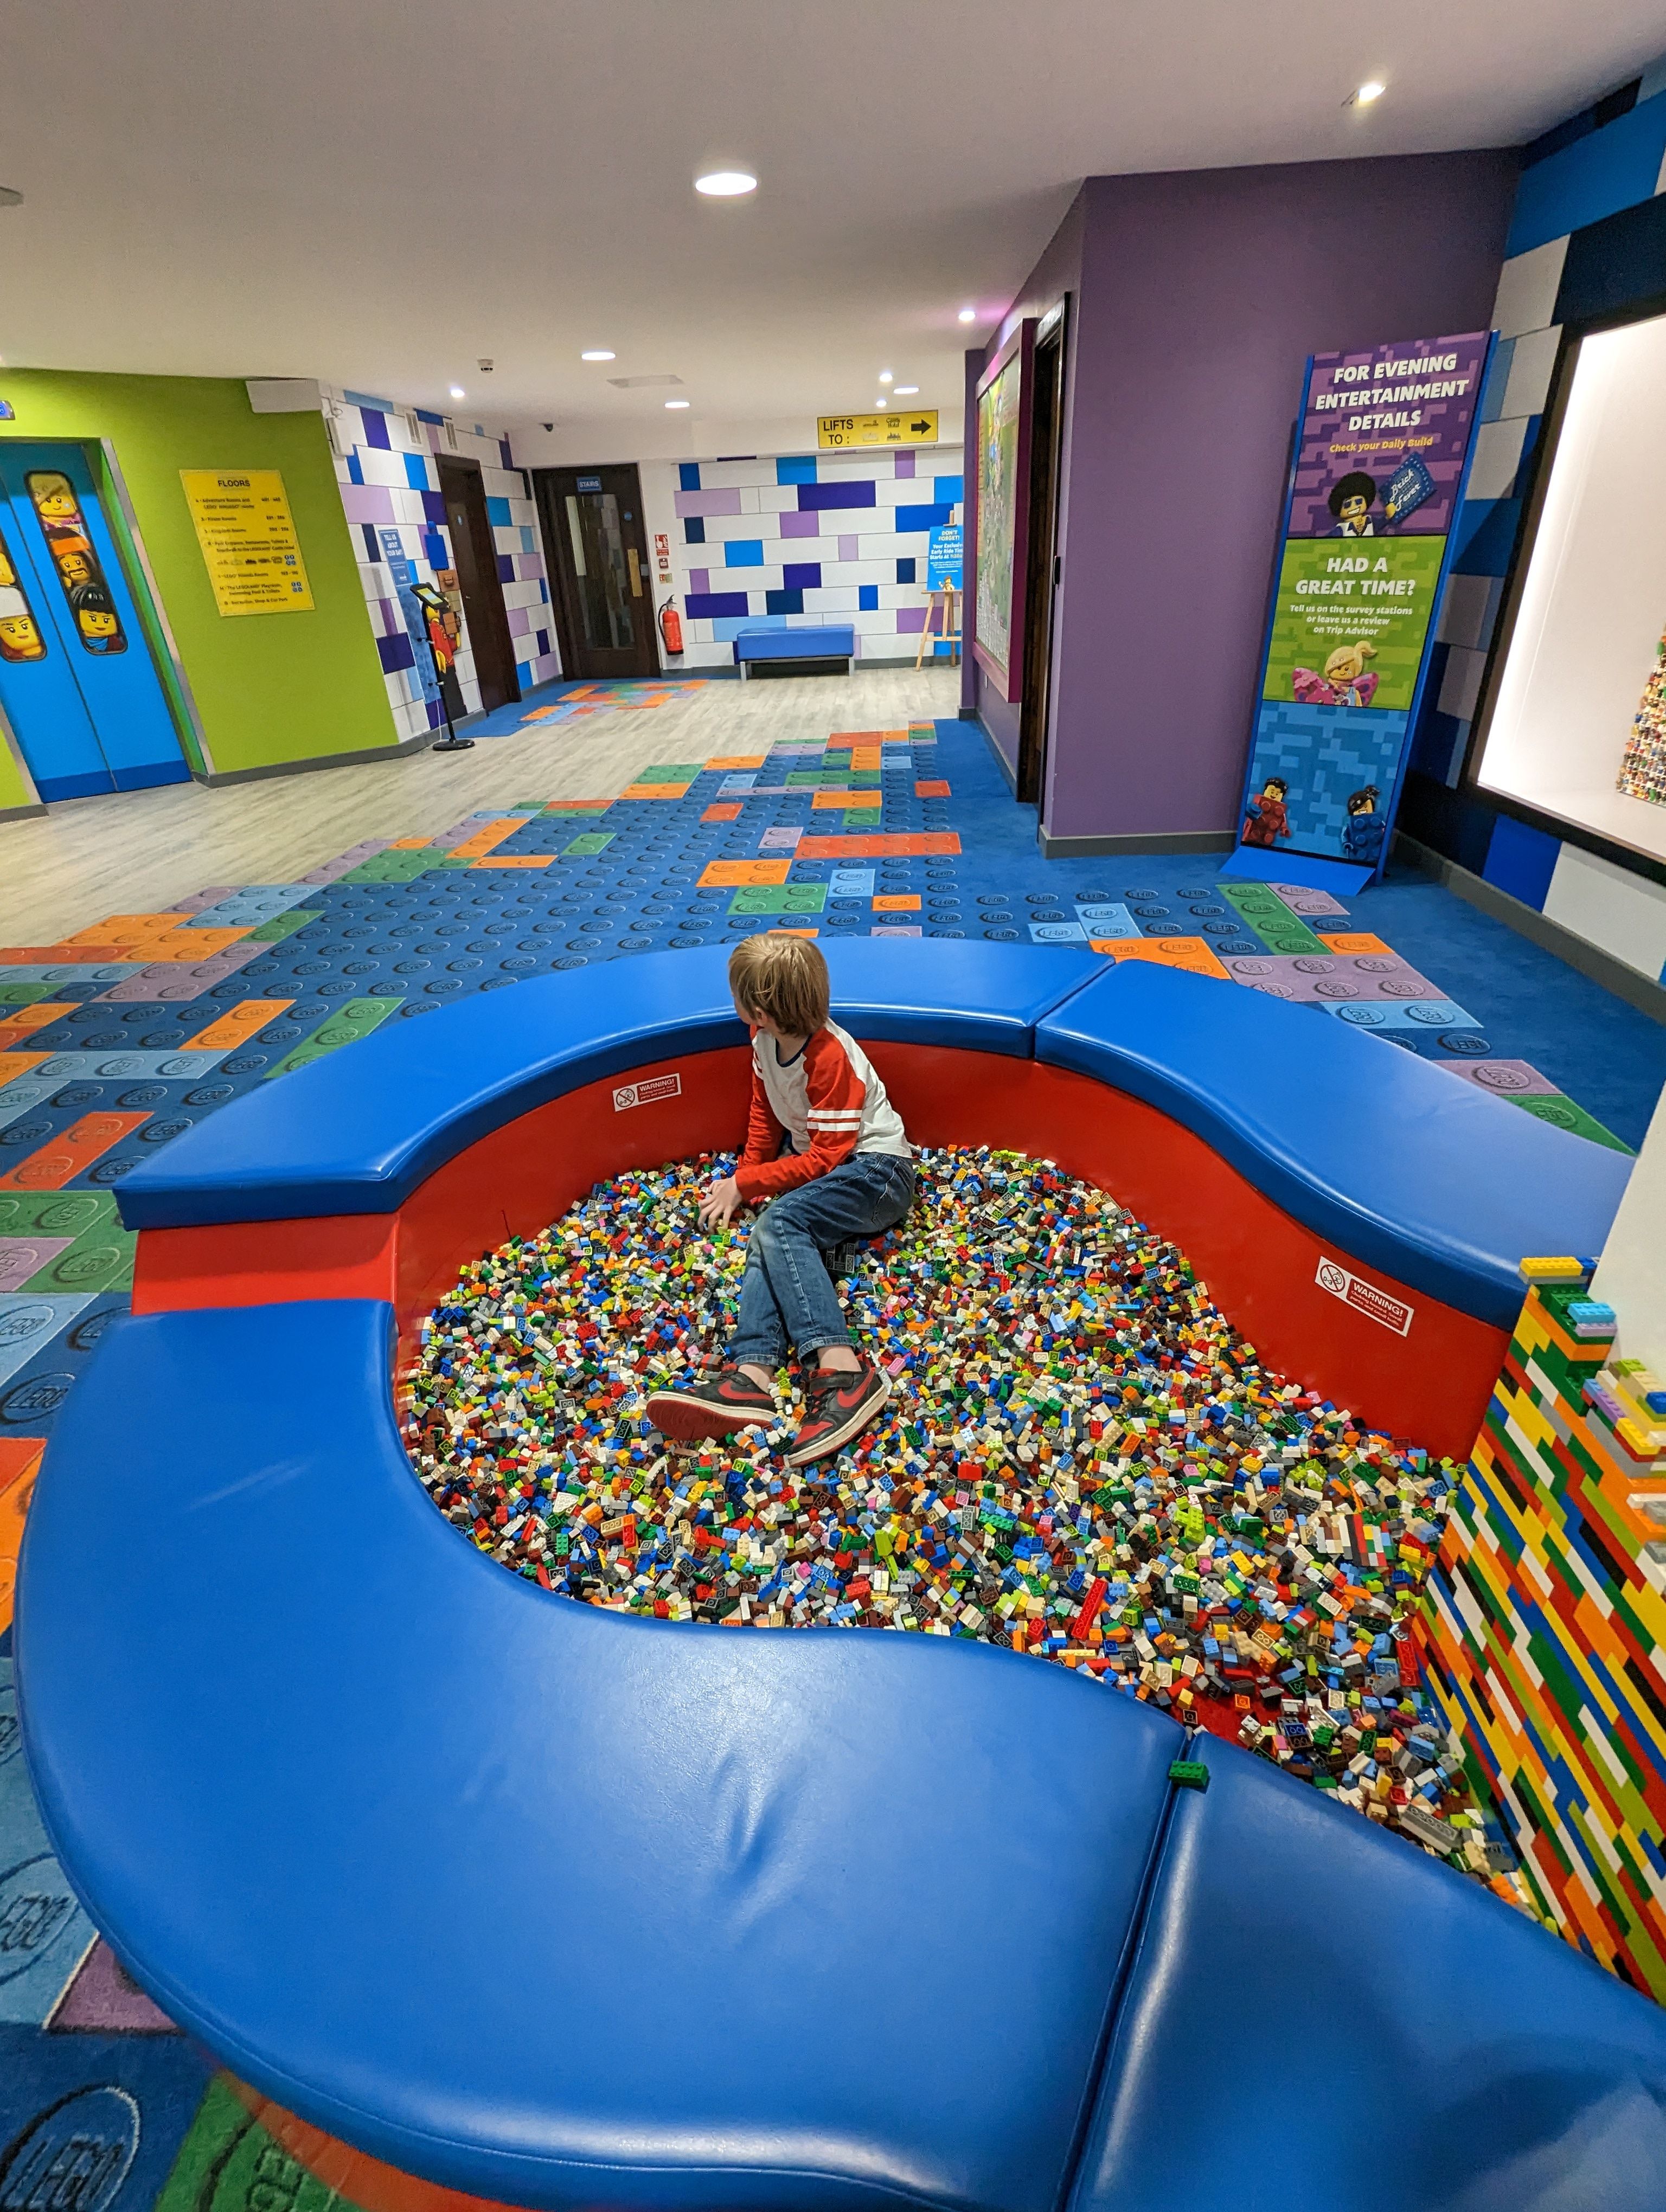 Legoland Resort reopened with a shiny new play area